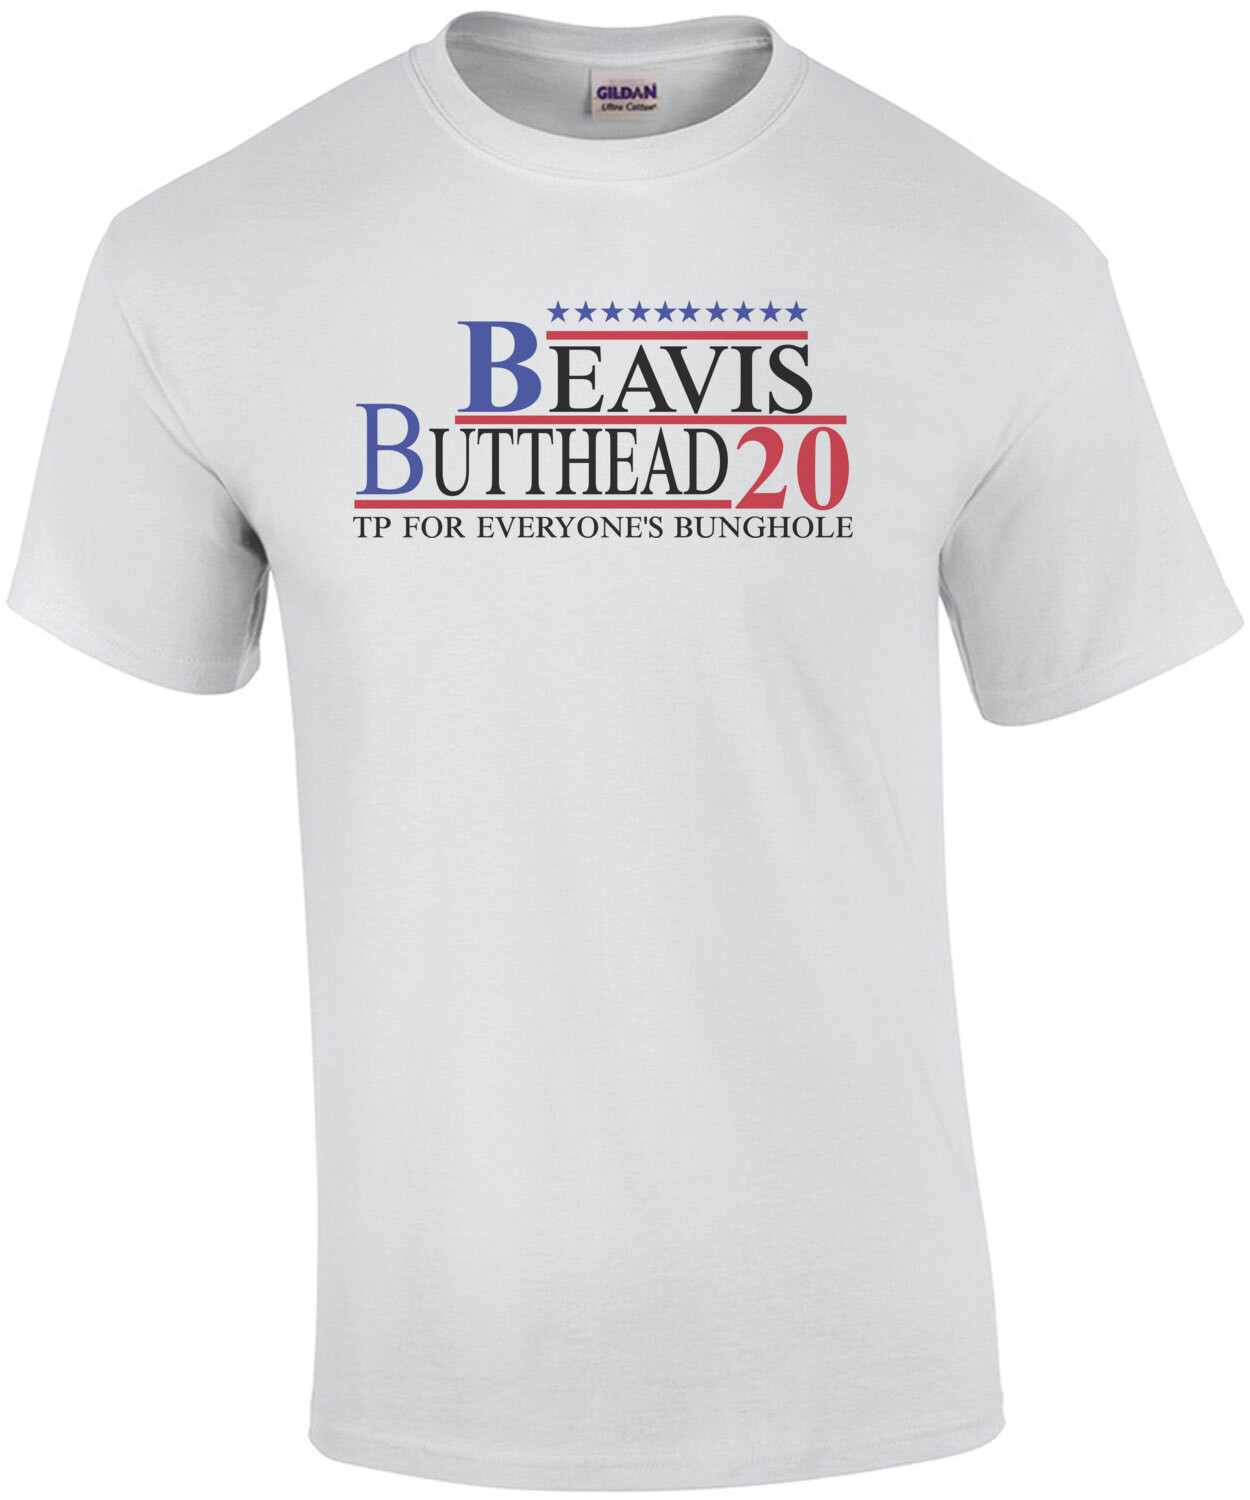 Beavis Butthead 2020 TP for everyone's bunghole - funny 2020 election t-shirt